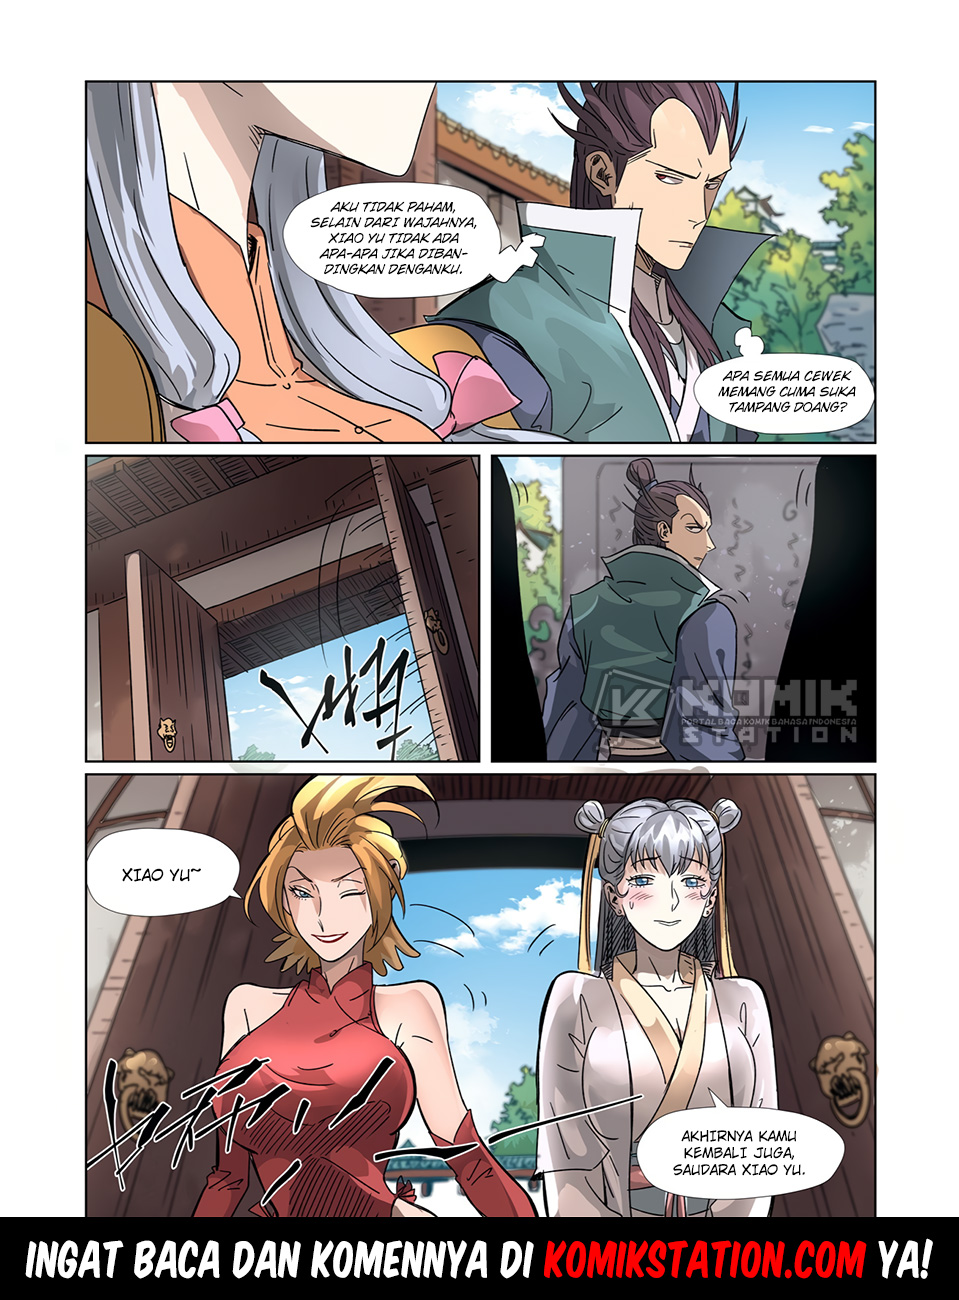 Tales of Demons and Gods Chapter 302-5